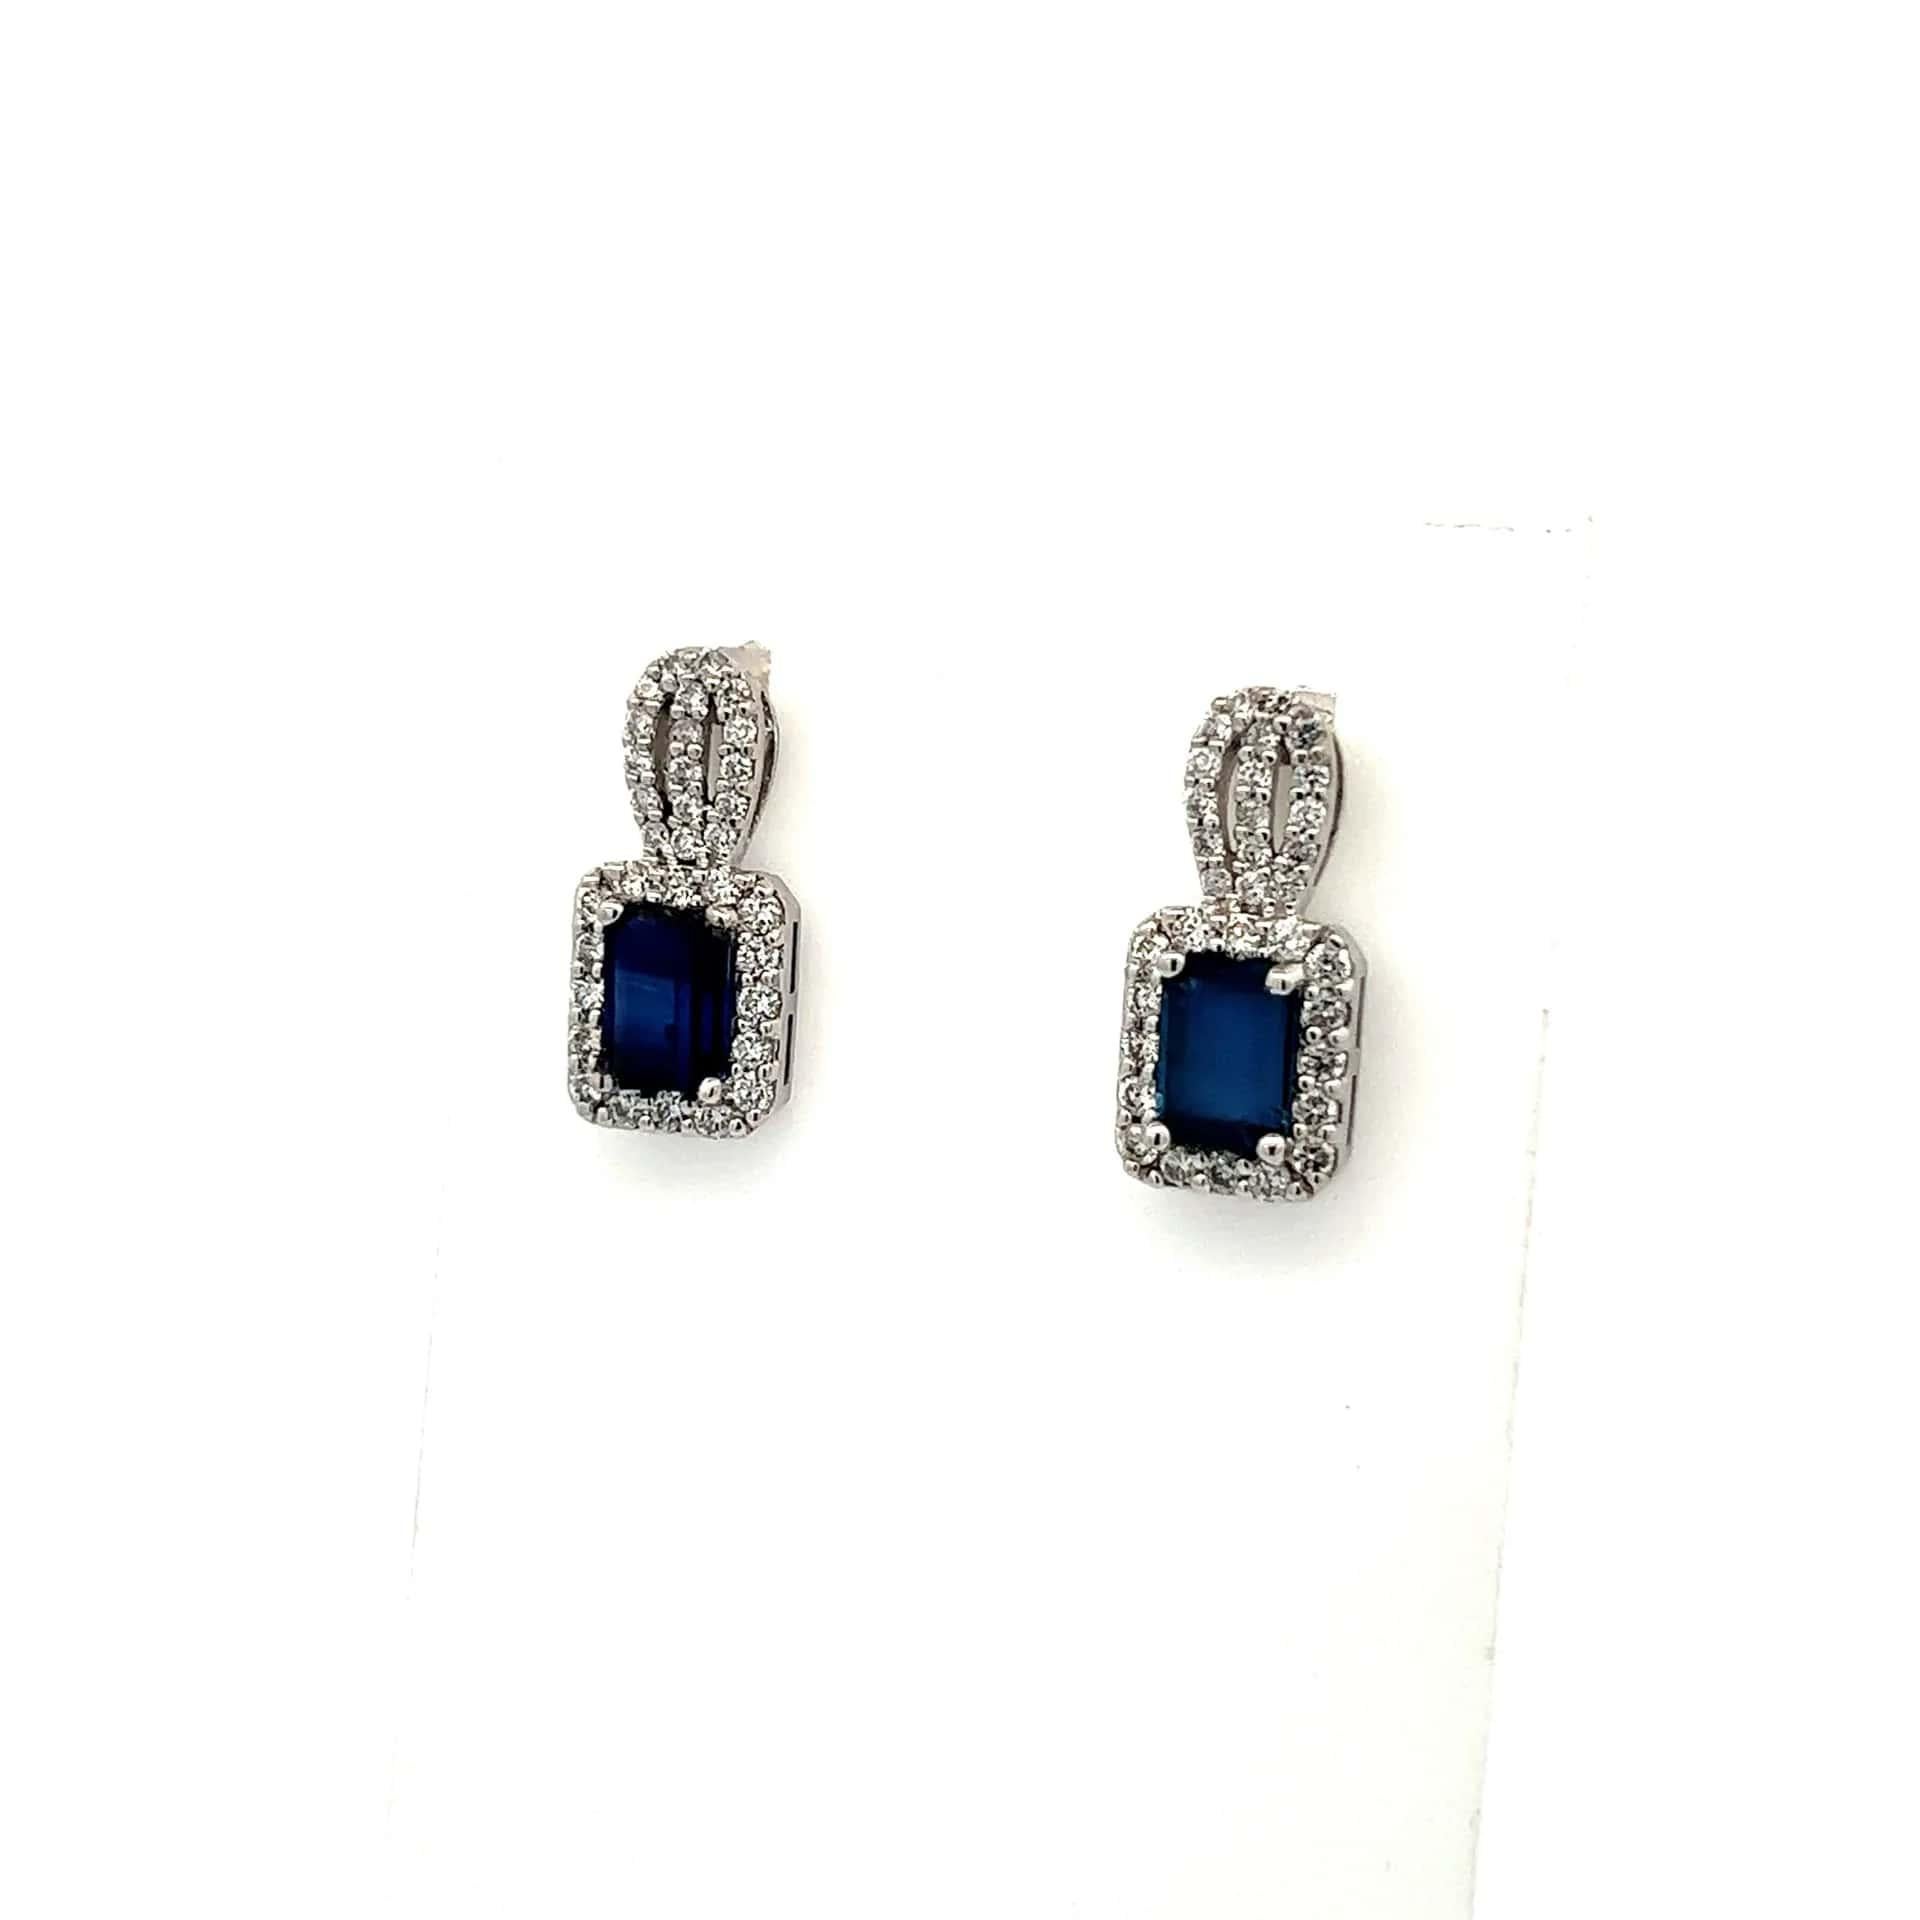 Natural Sapphire Diamond Earrings 14k W Gold 2.84 TCW Certified  For Sale 1